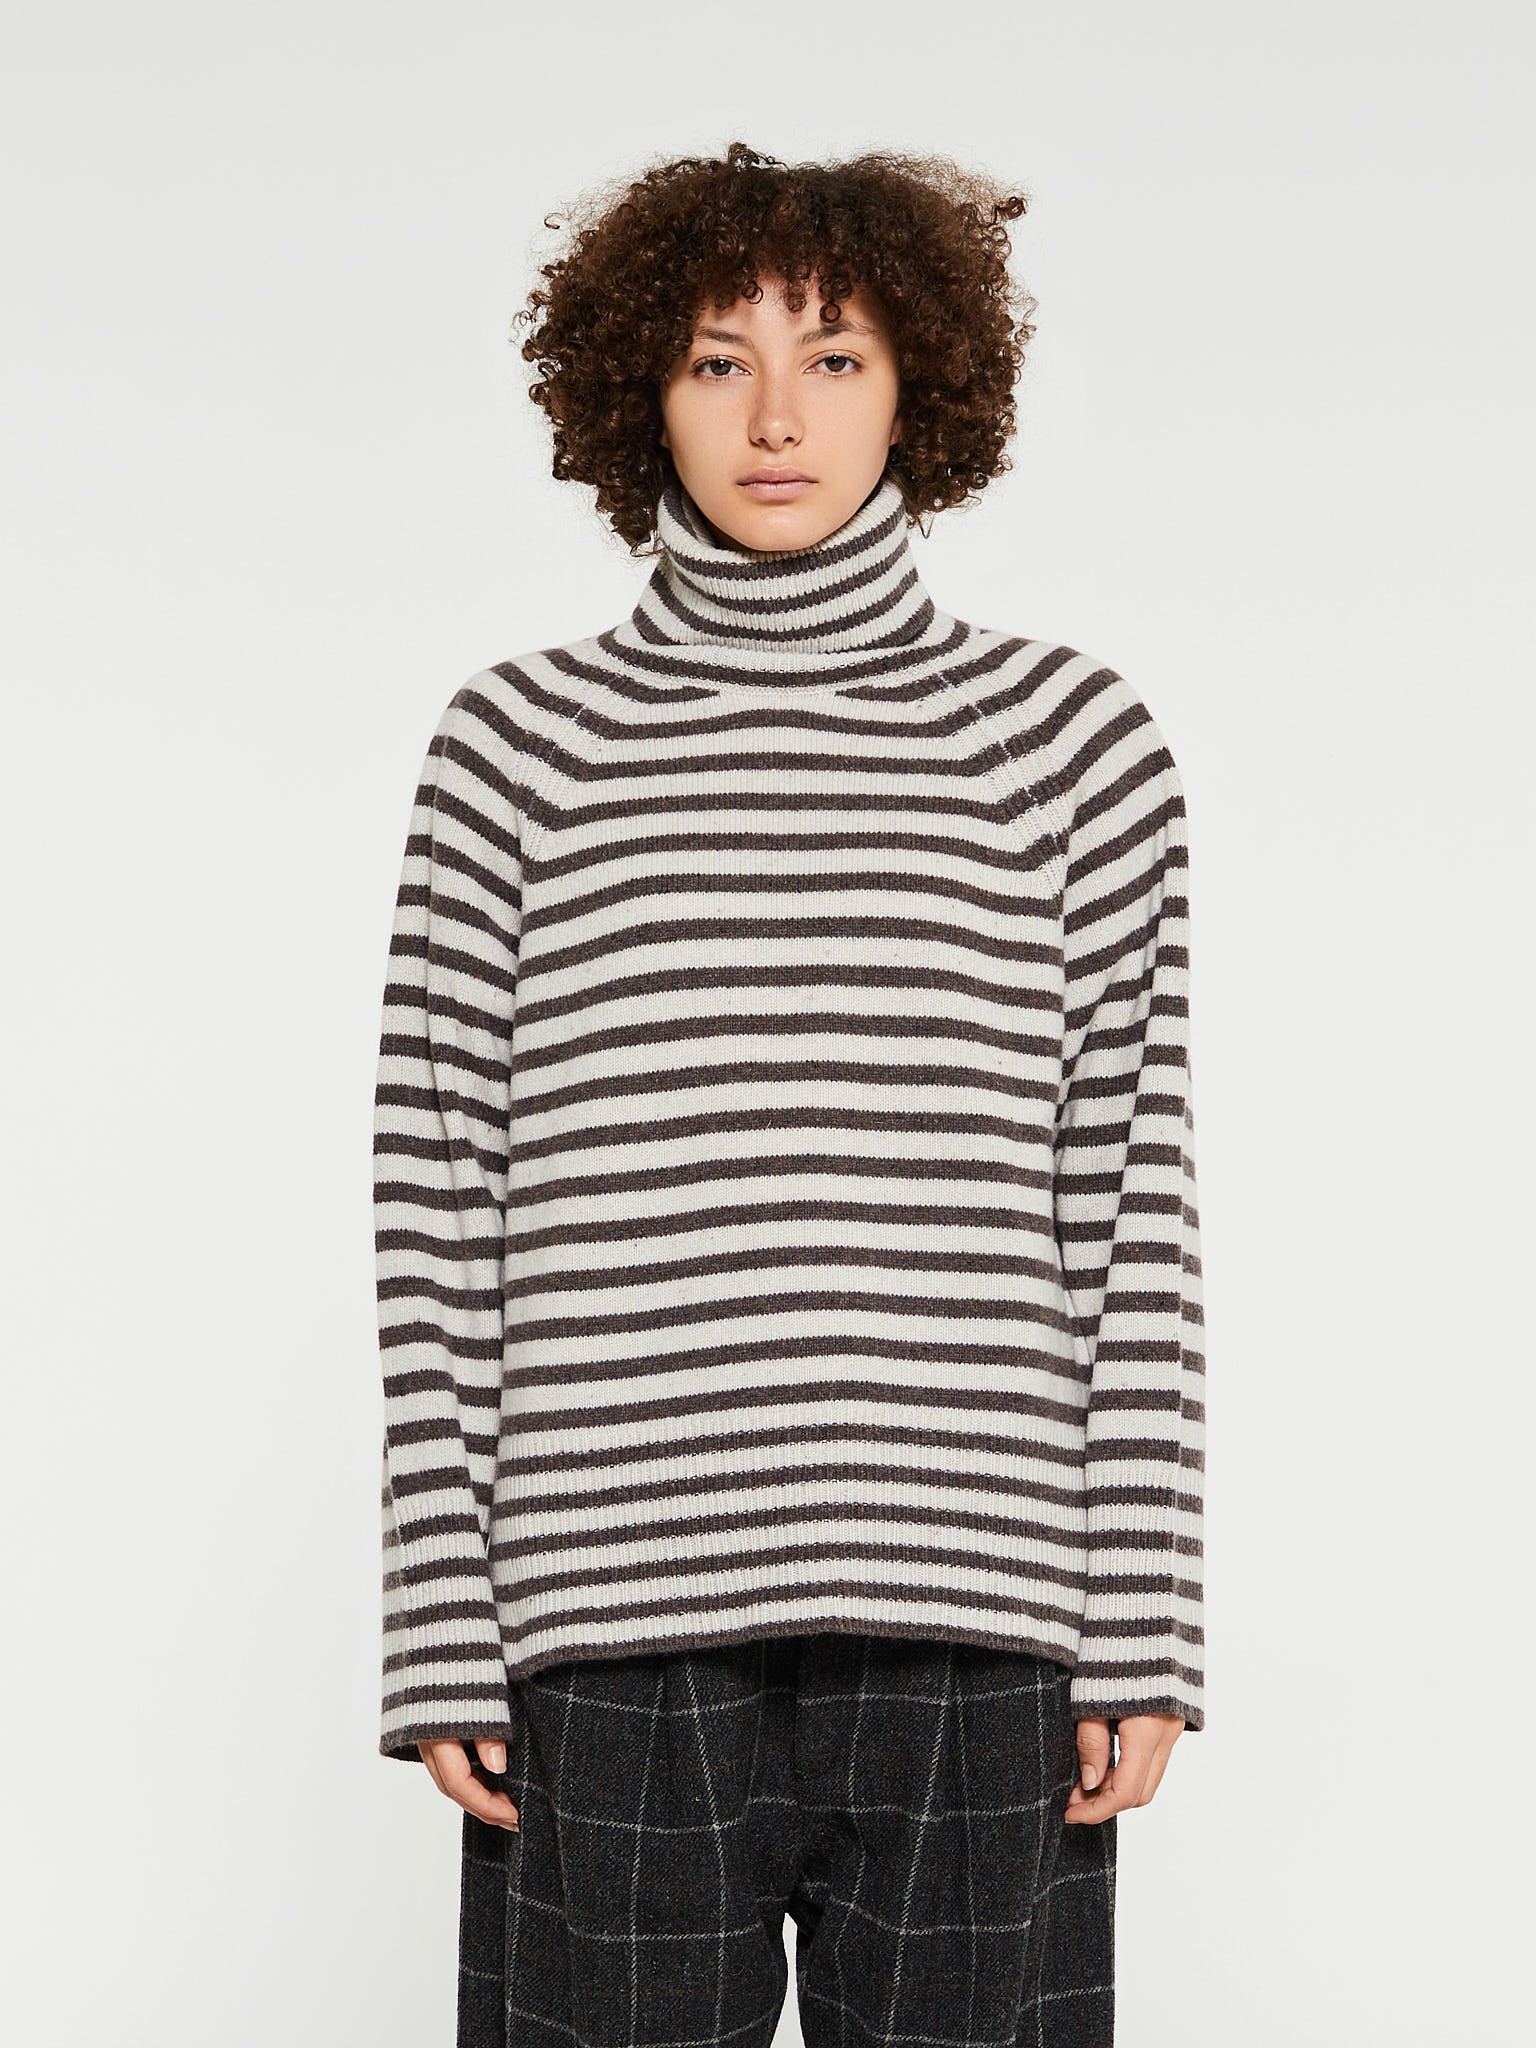 Proem Parades - Svala Stripe Cashmere Sweater in Brown and White